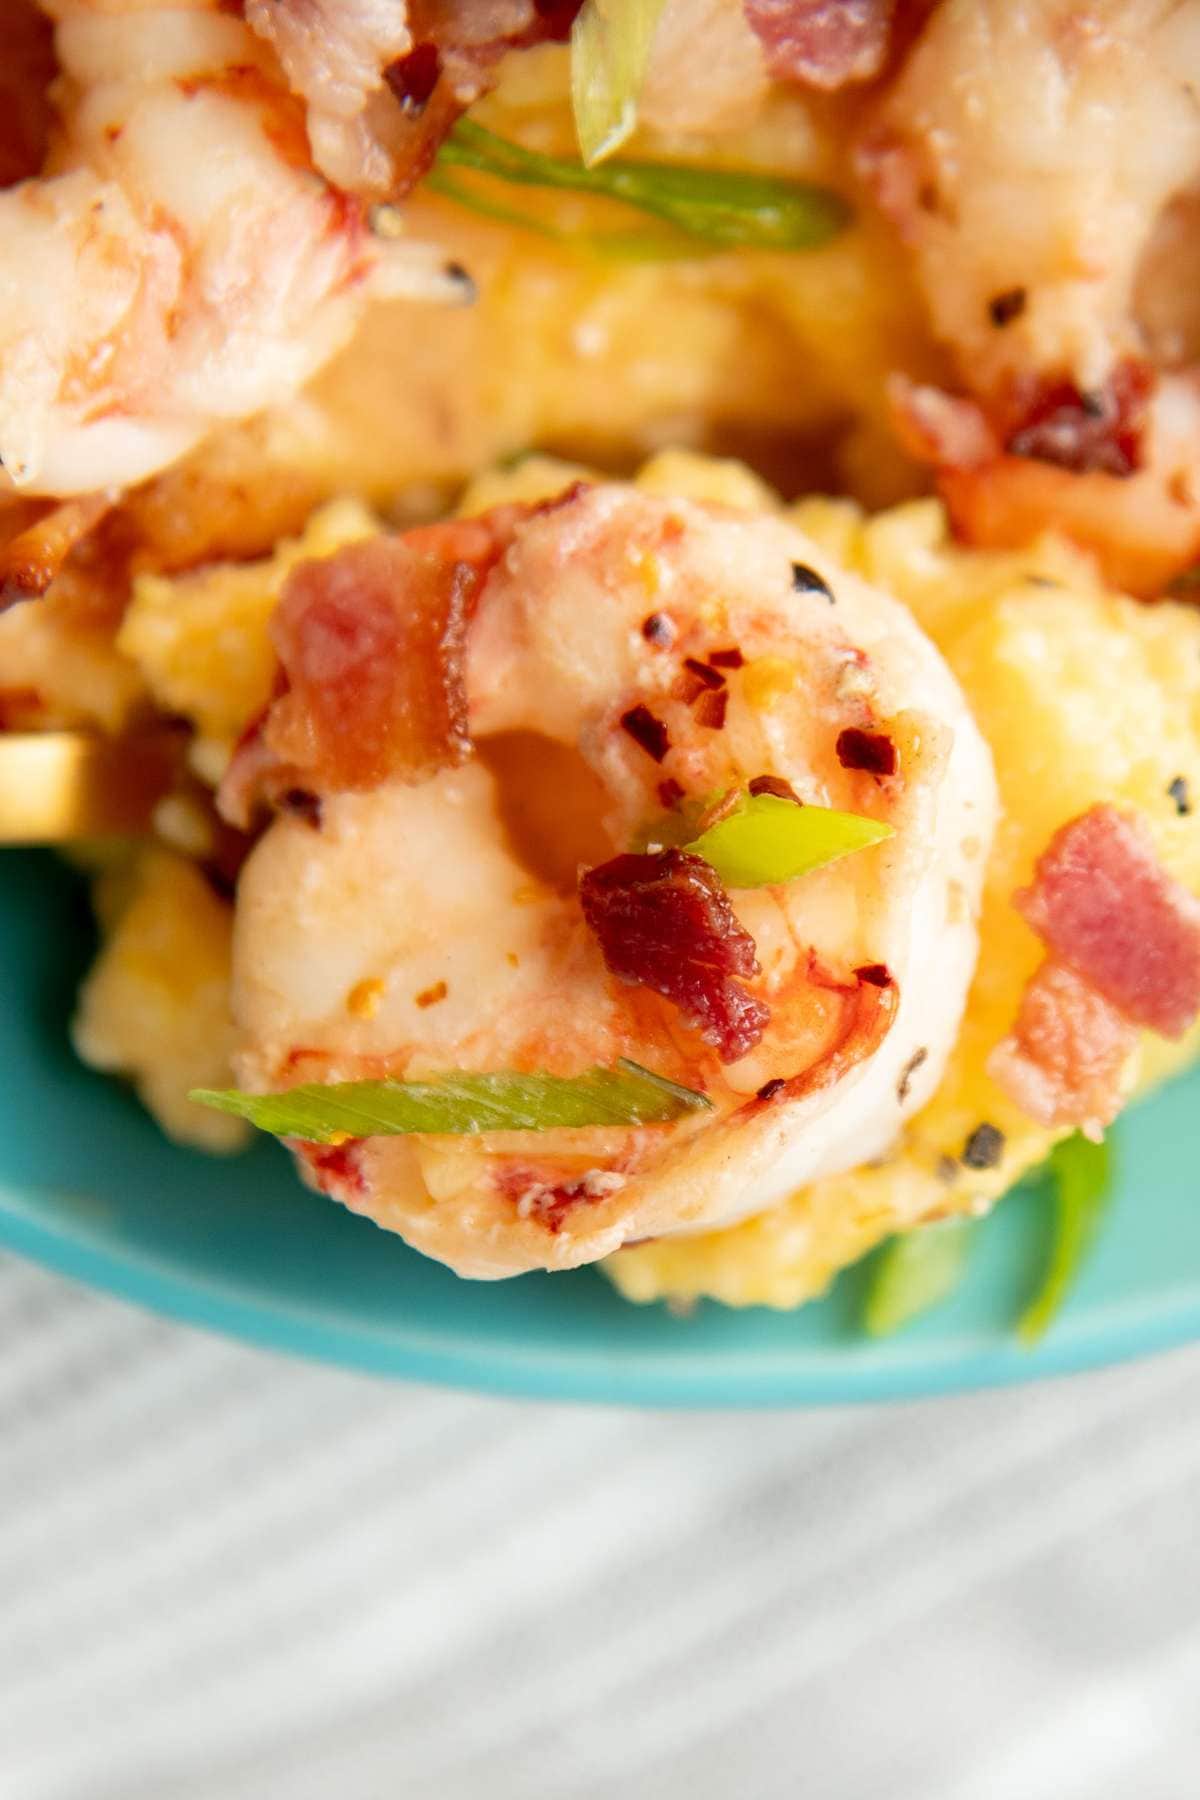 Close up of a plump, pink shrimp with crumbled bacon, red pepper flakes, and sliced green onion.